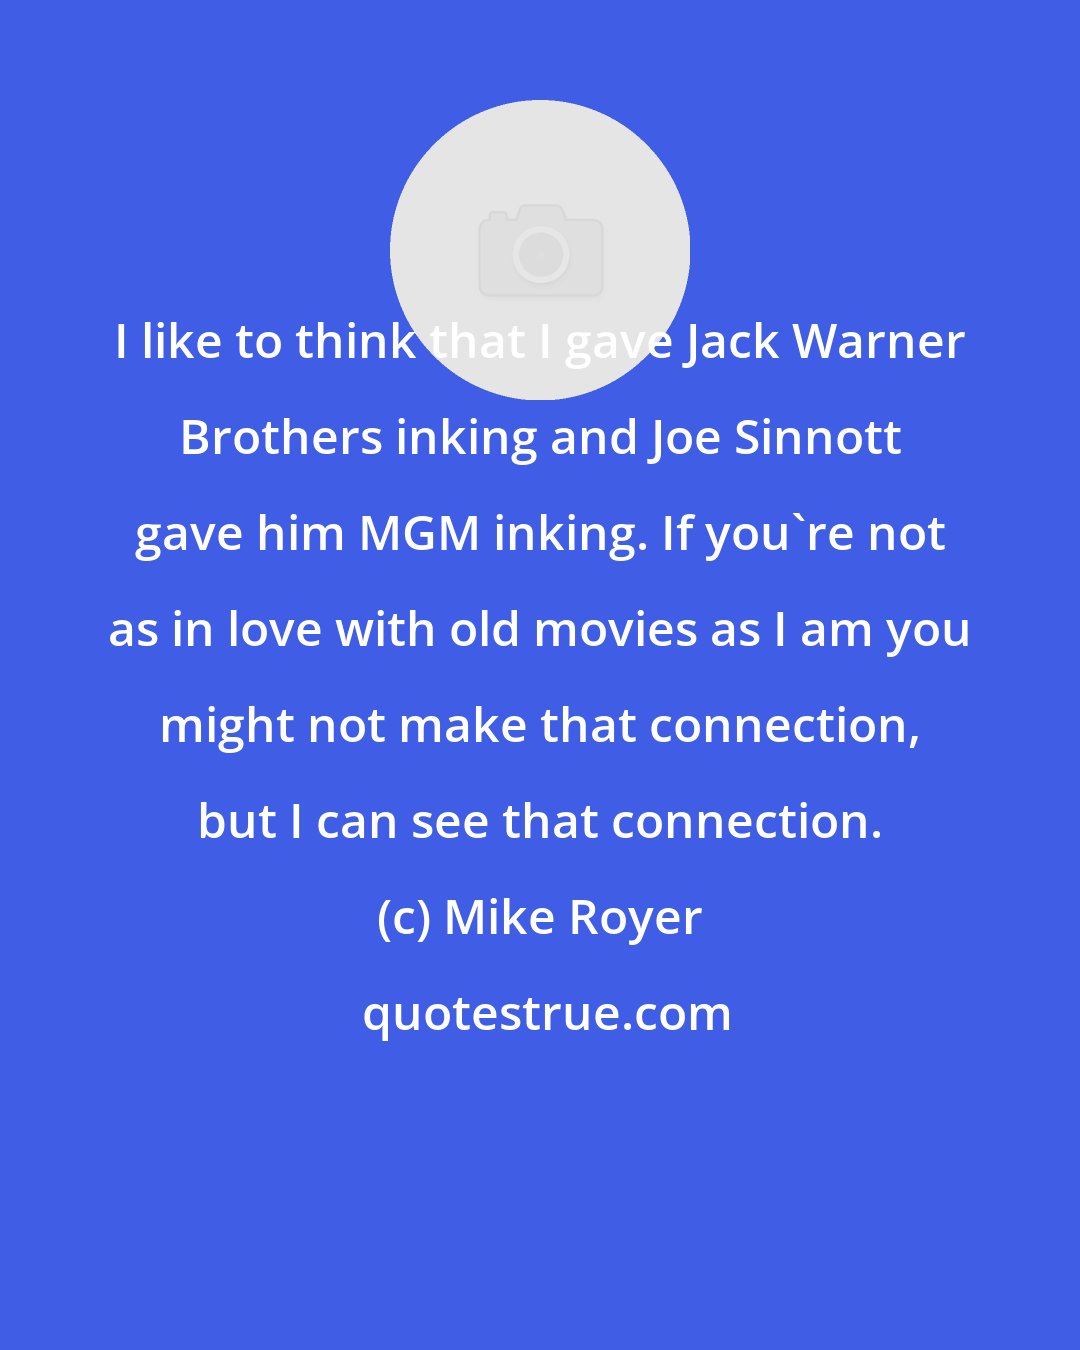 Mike Royer: I like to think that I gave Jack Warner Brothers inking and Joe Sinnott gave him MGM inking. If you're not as in love with old movies as I am you might not make that connection, but I can see that connection.